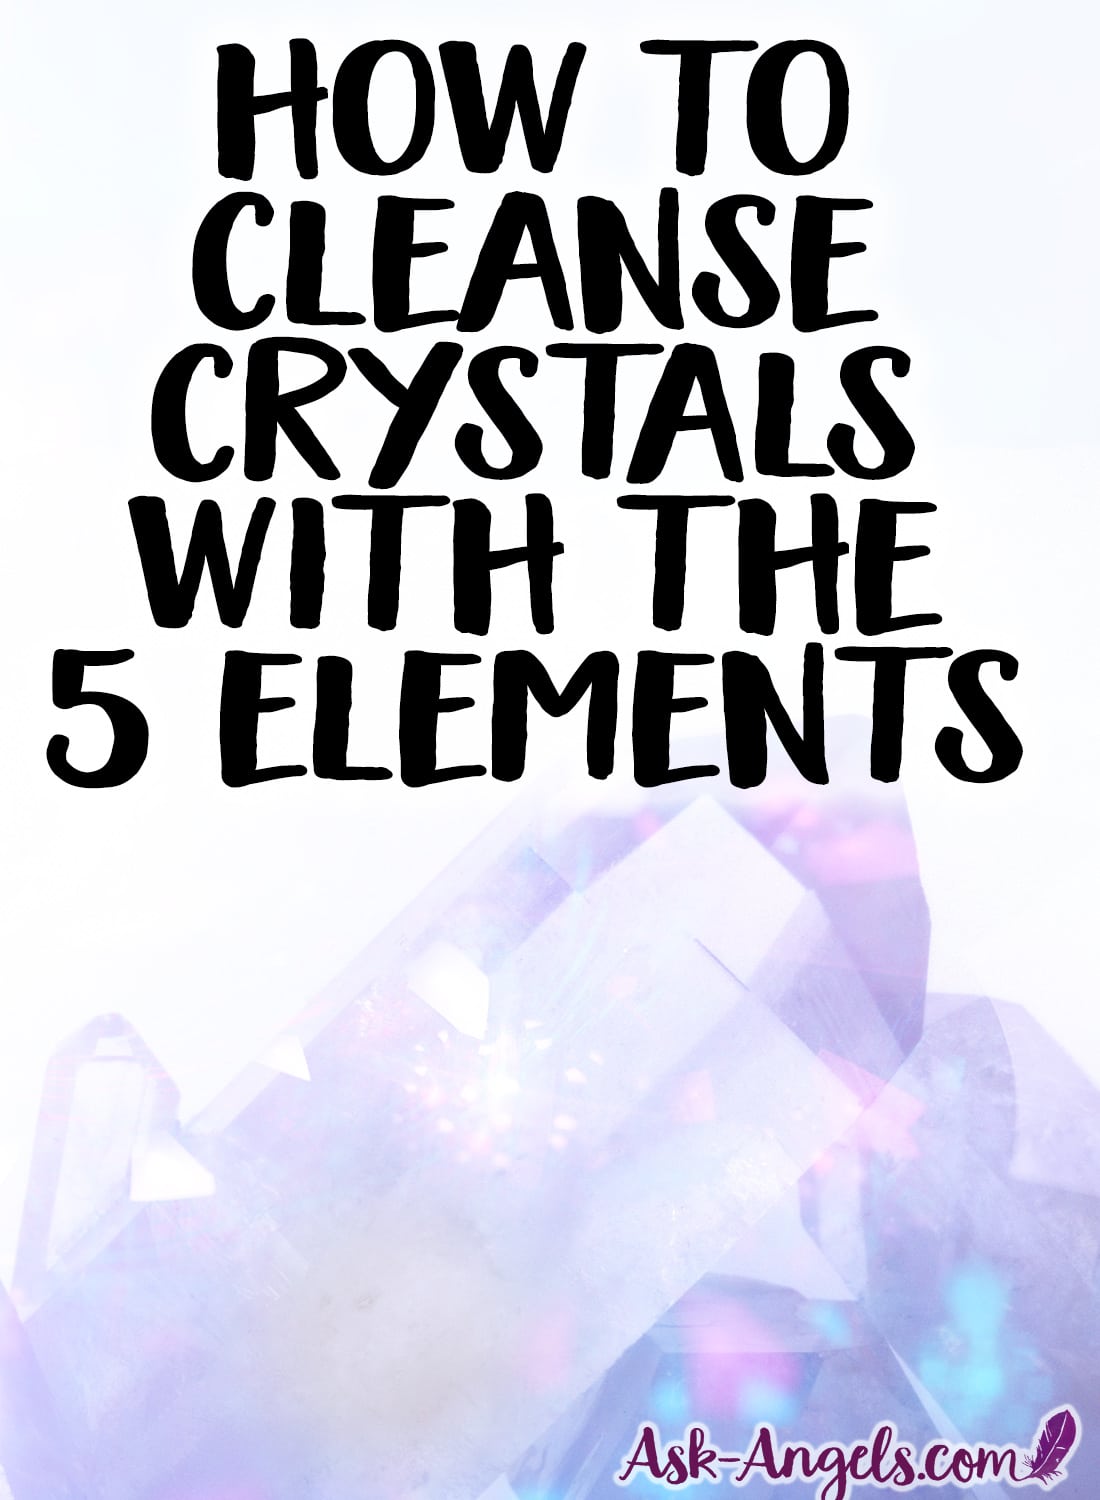 How to Cleanse Crystals with the 5 Elements